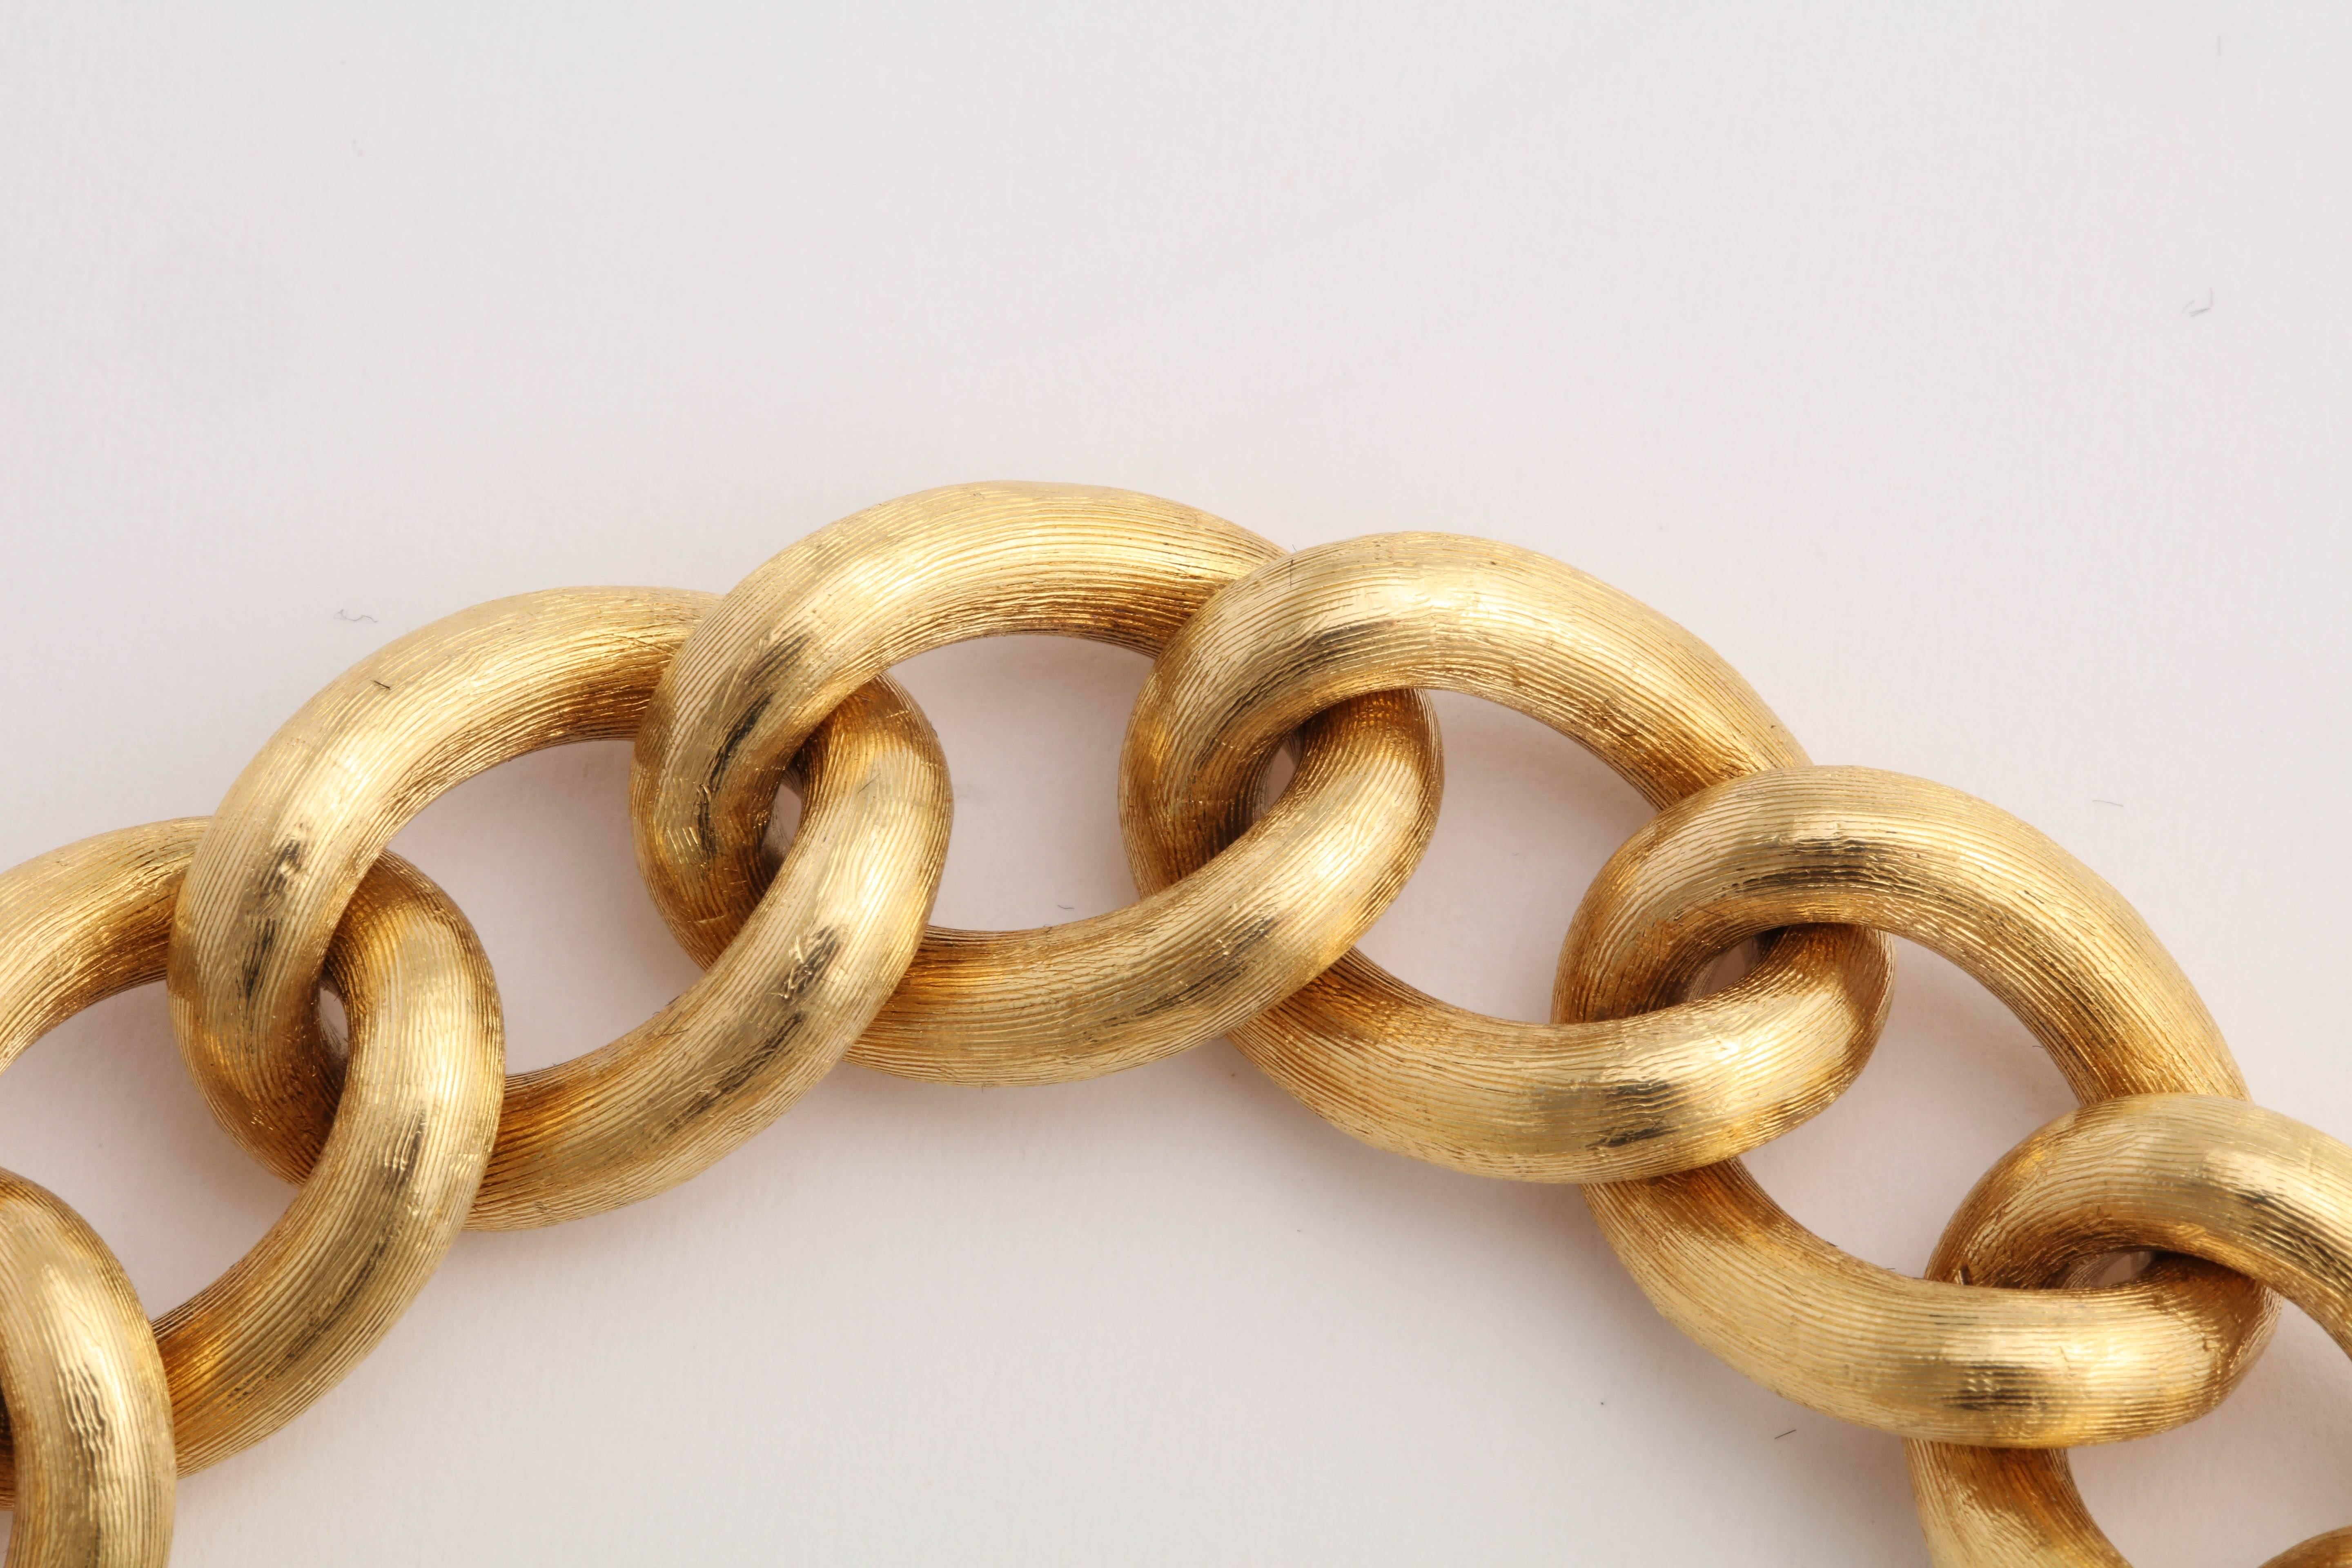 18ky Yellow Gold Cable Link bracelet with box clasp and heavy safety chain. Brushed Florentine finish.  Beautifully made and oh so chic!  How could you live without one!  If you already have one - make that two!